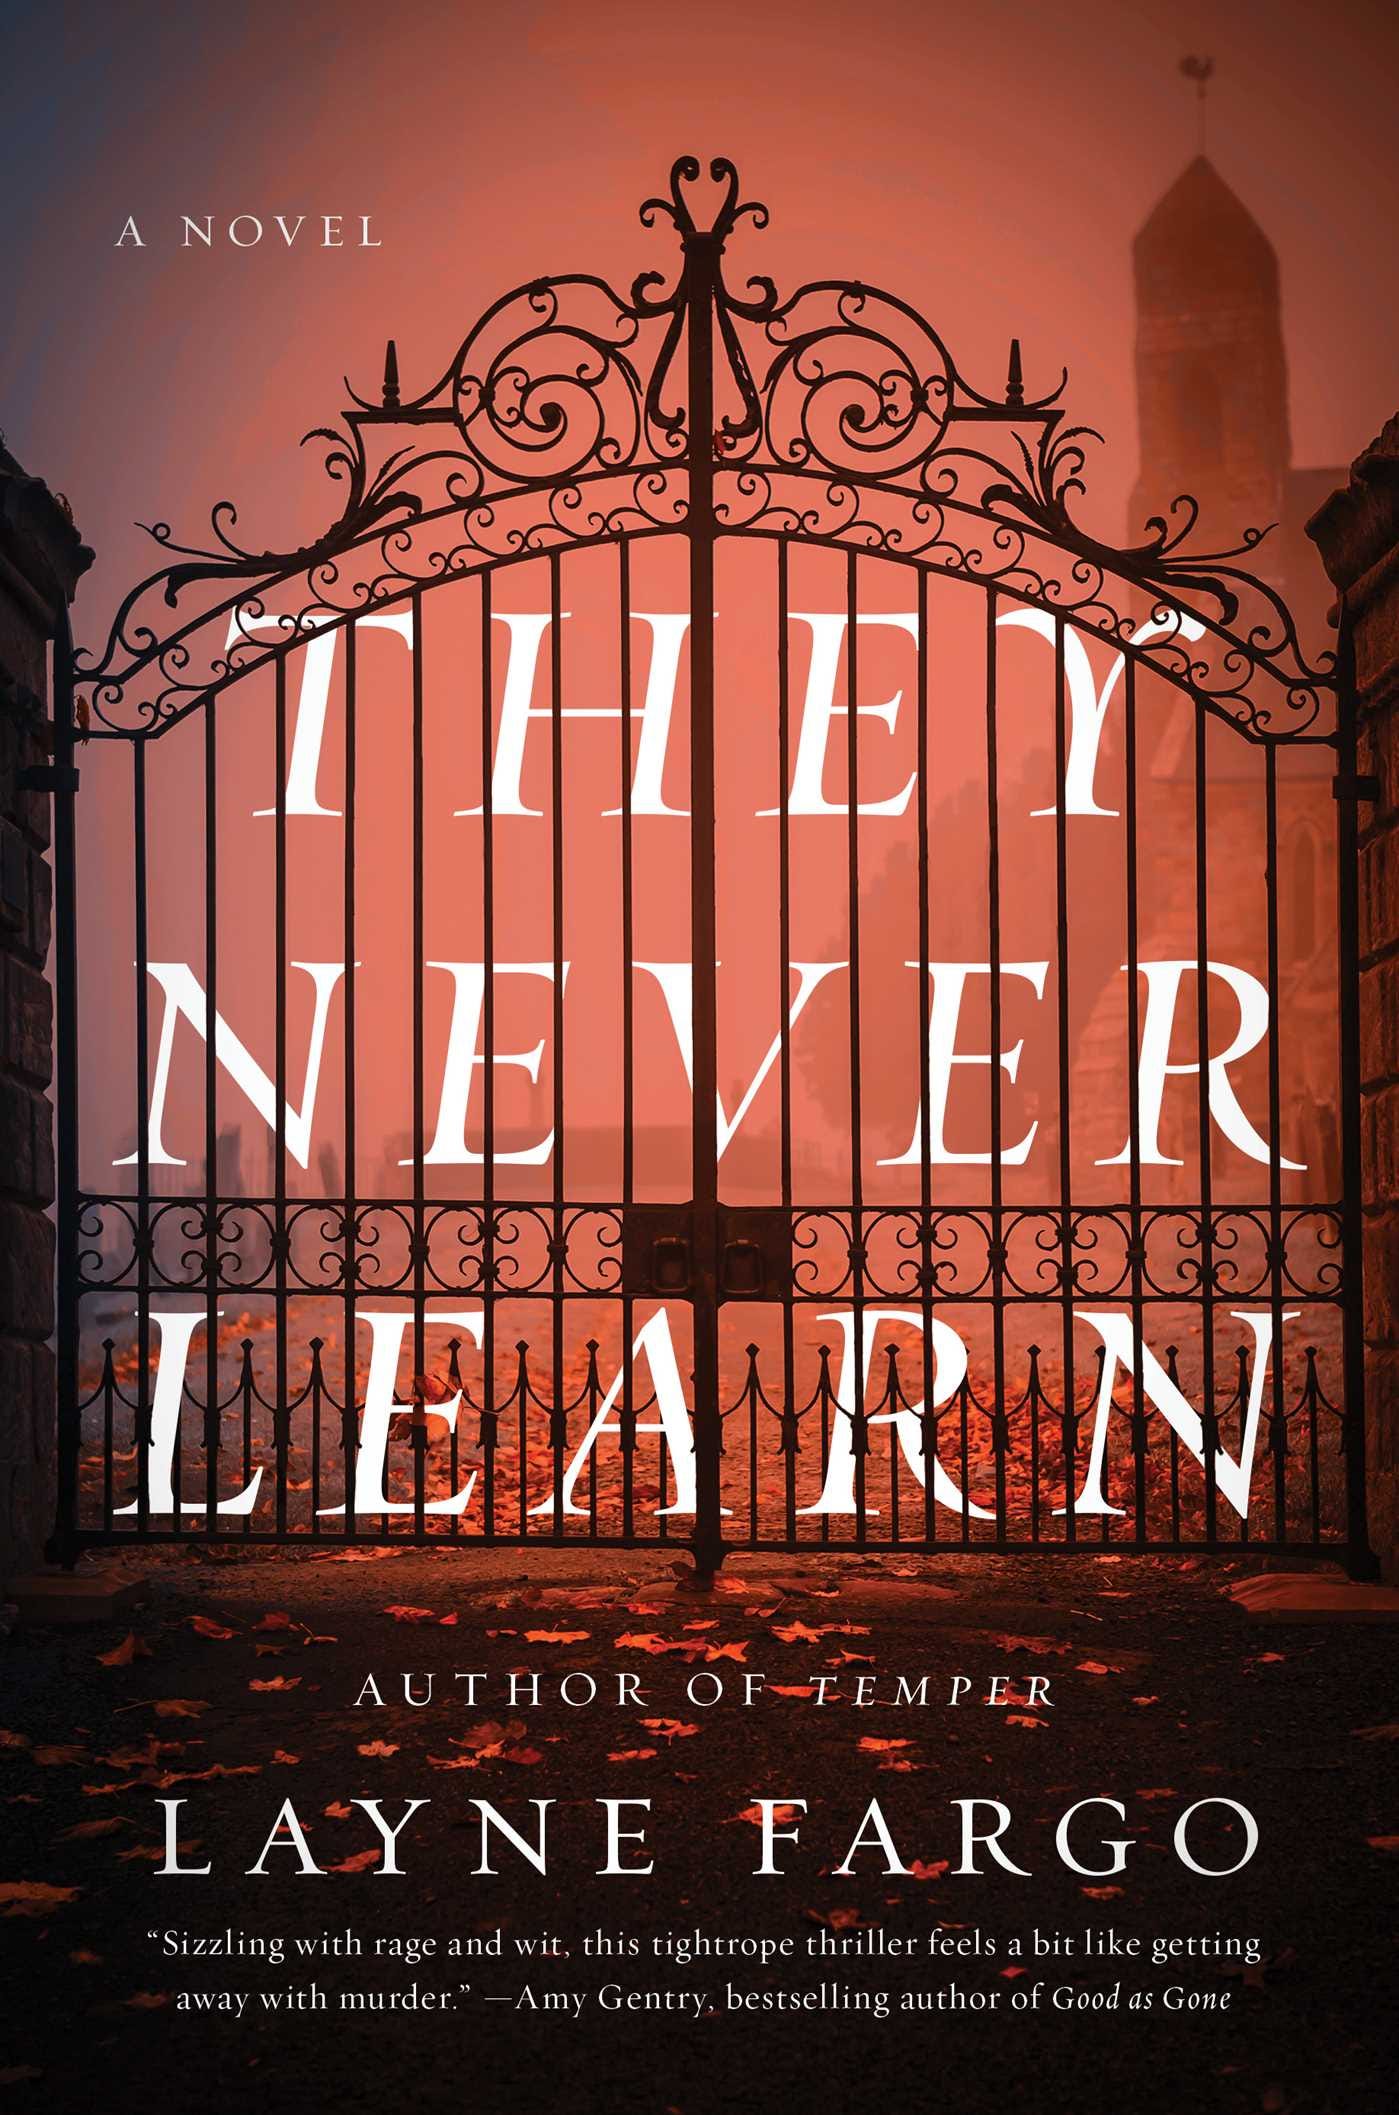 They Never Learn by Layne Fargo | Goodreads